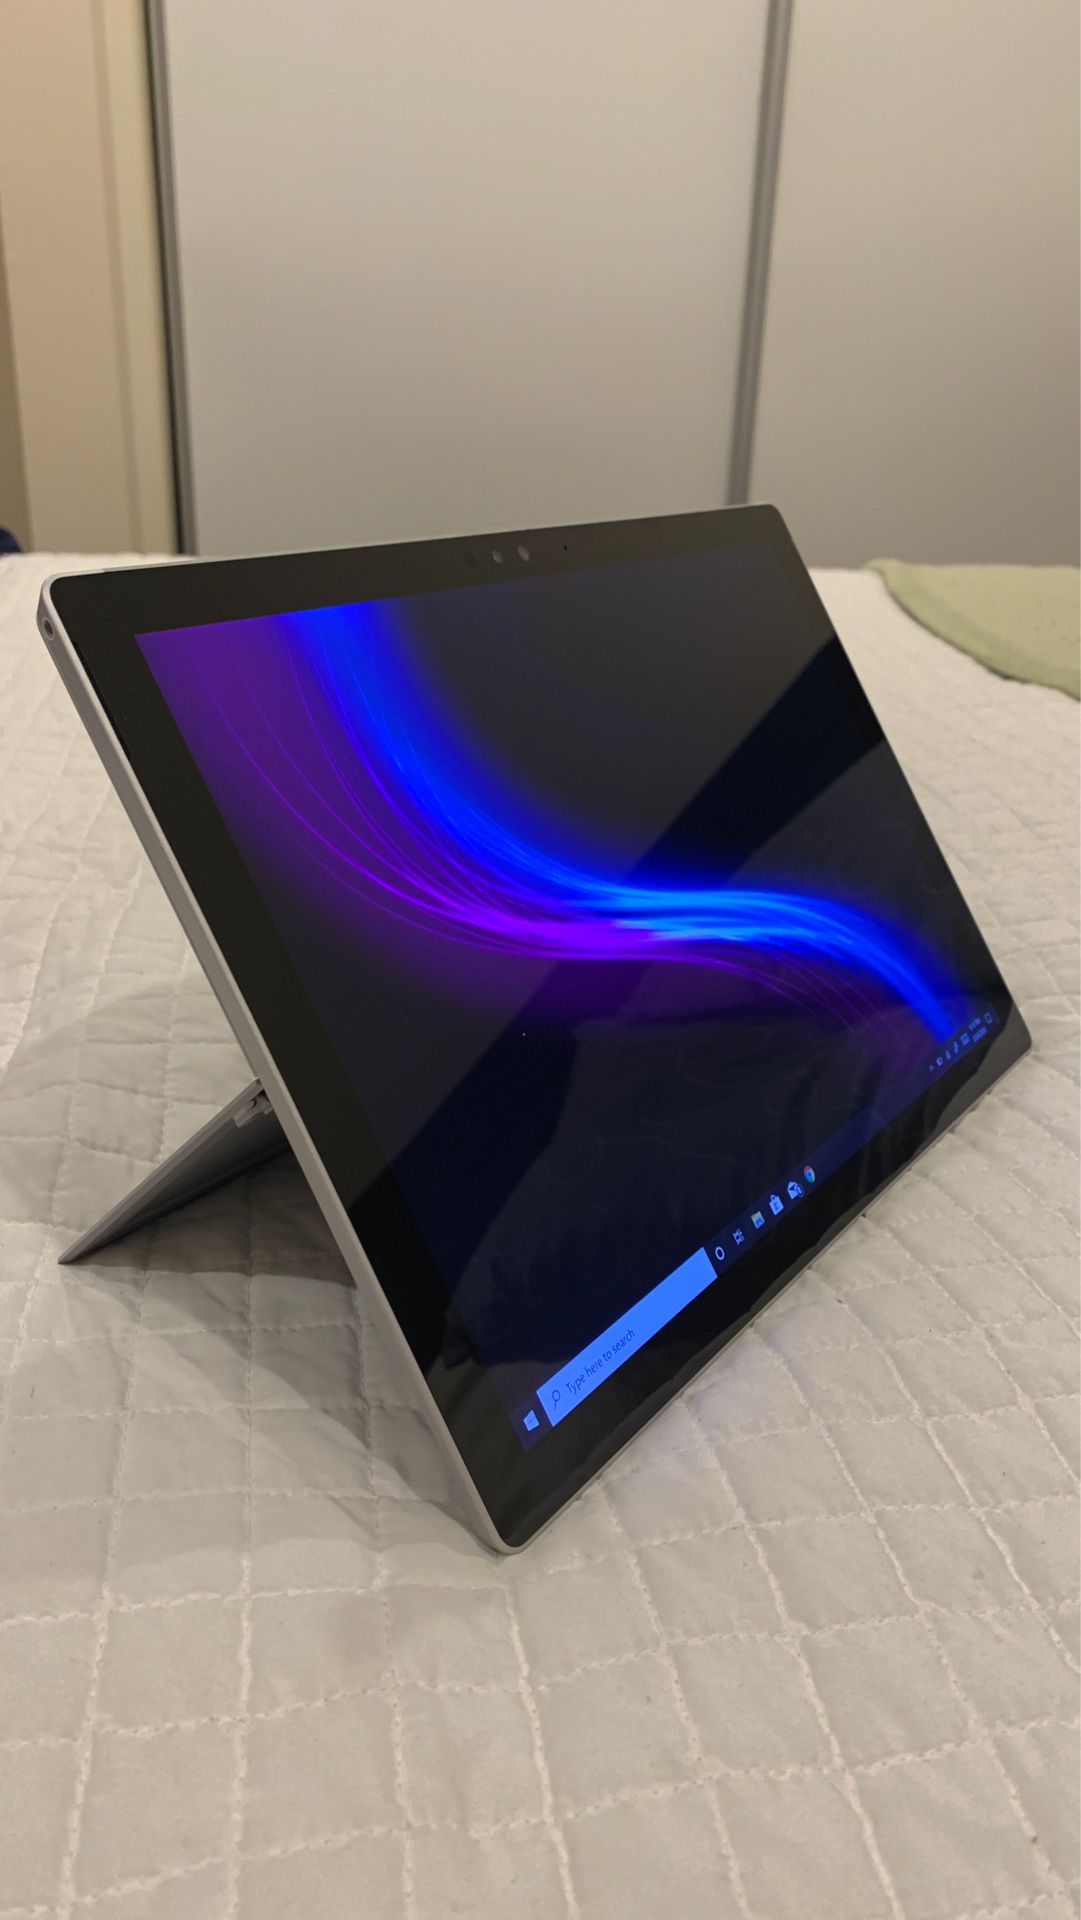 Microsoft Surface Pro 4 (perfect condition)